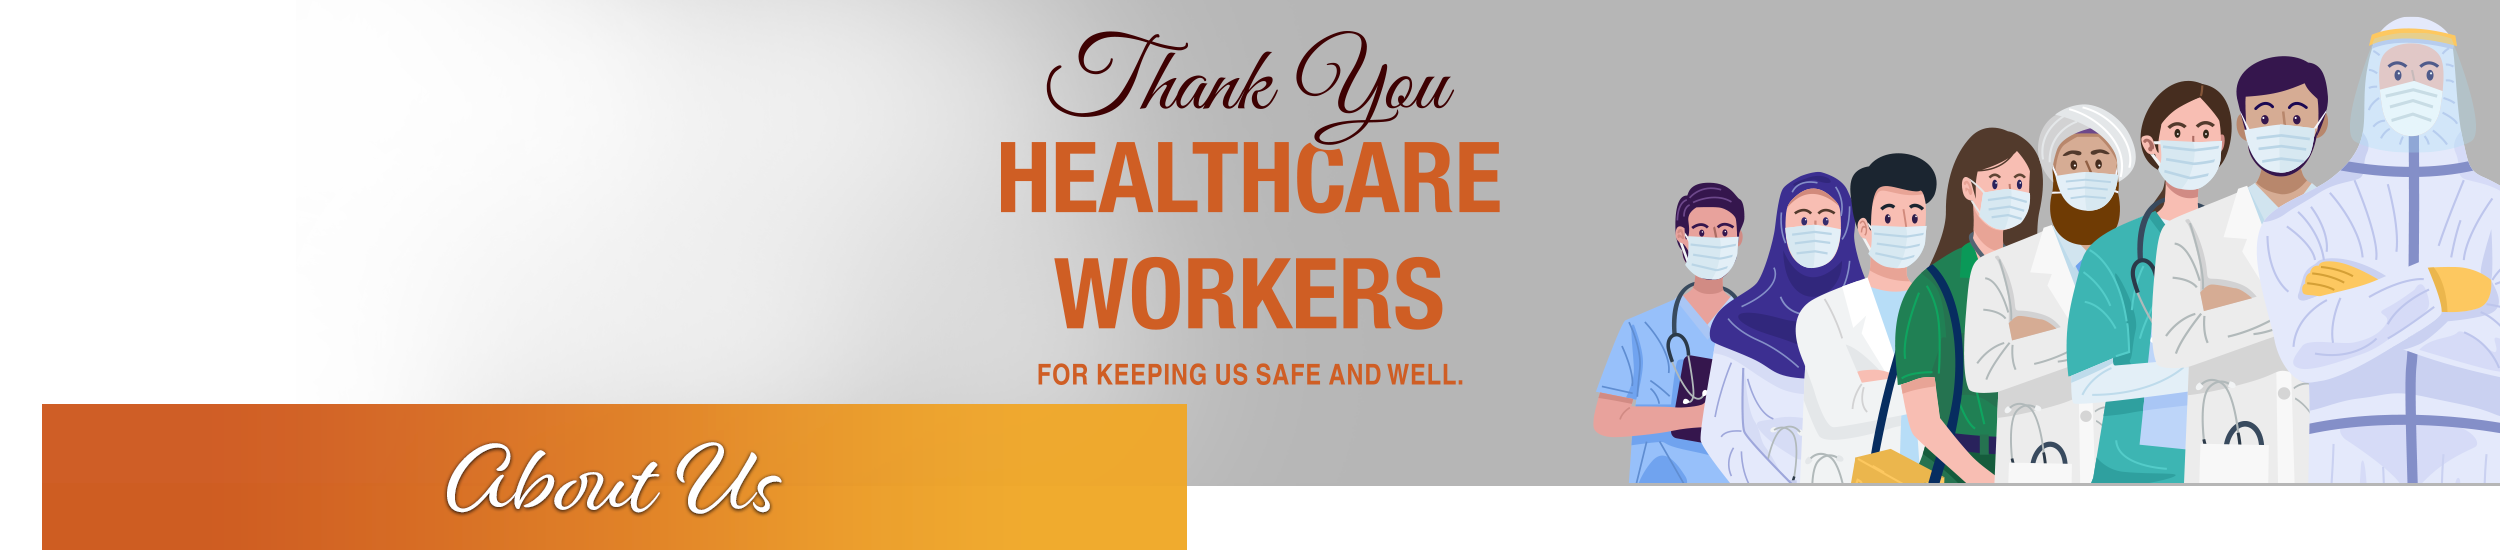 About Us

Thank You Healthcare Workers for keeping us safe and well.